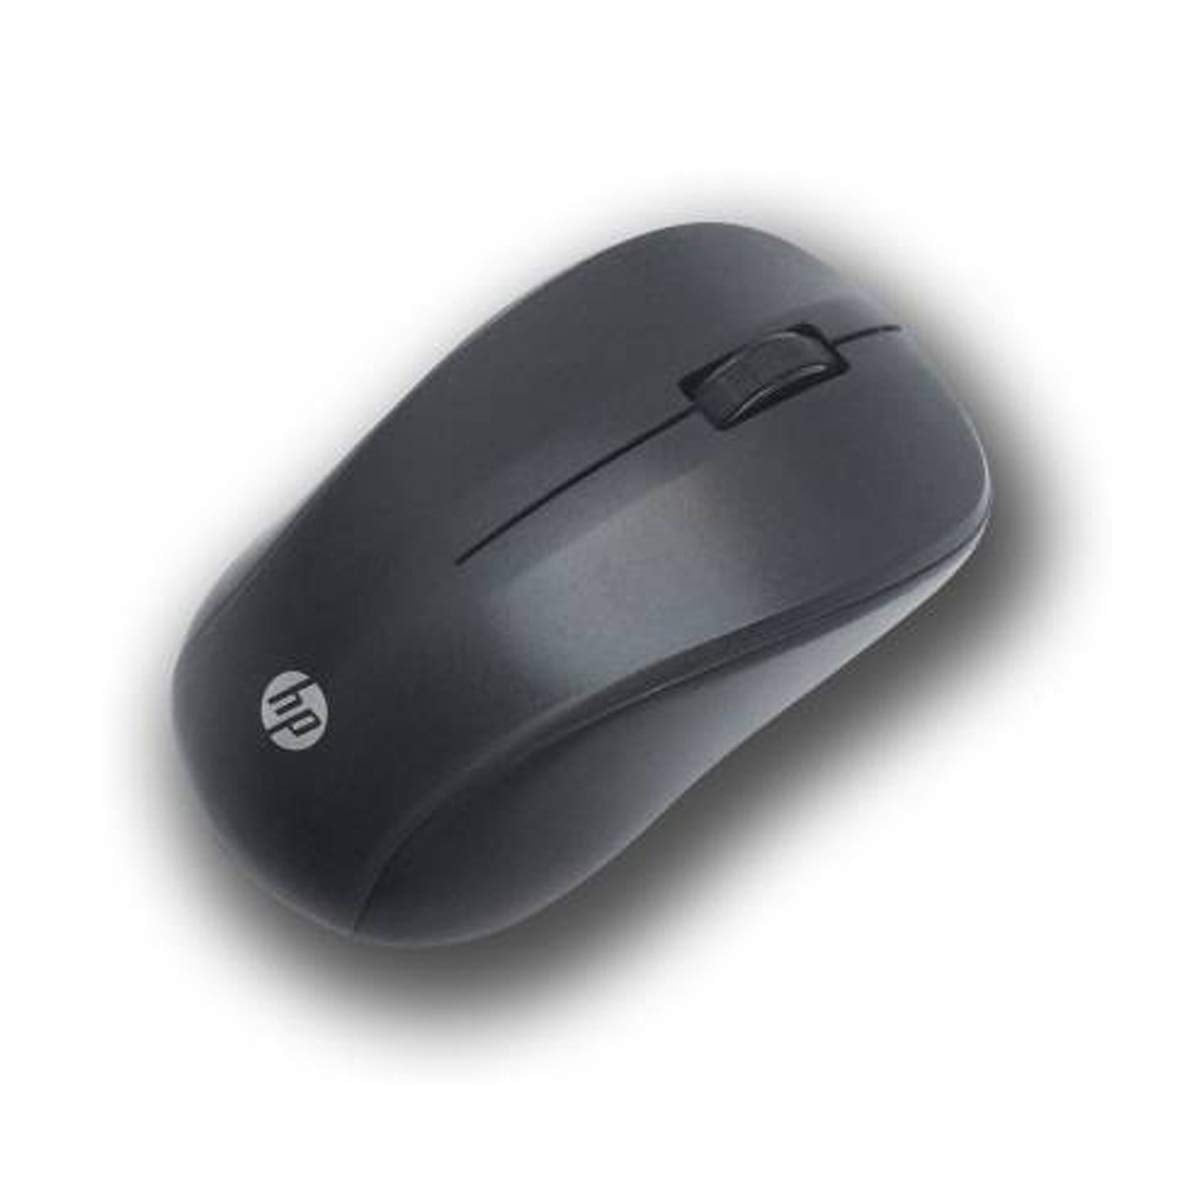 HP S500 Wireless Optical Mouse  (2.4GHz Wireless, Black)